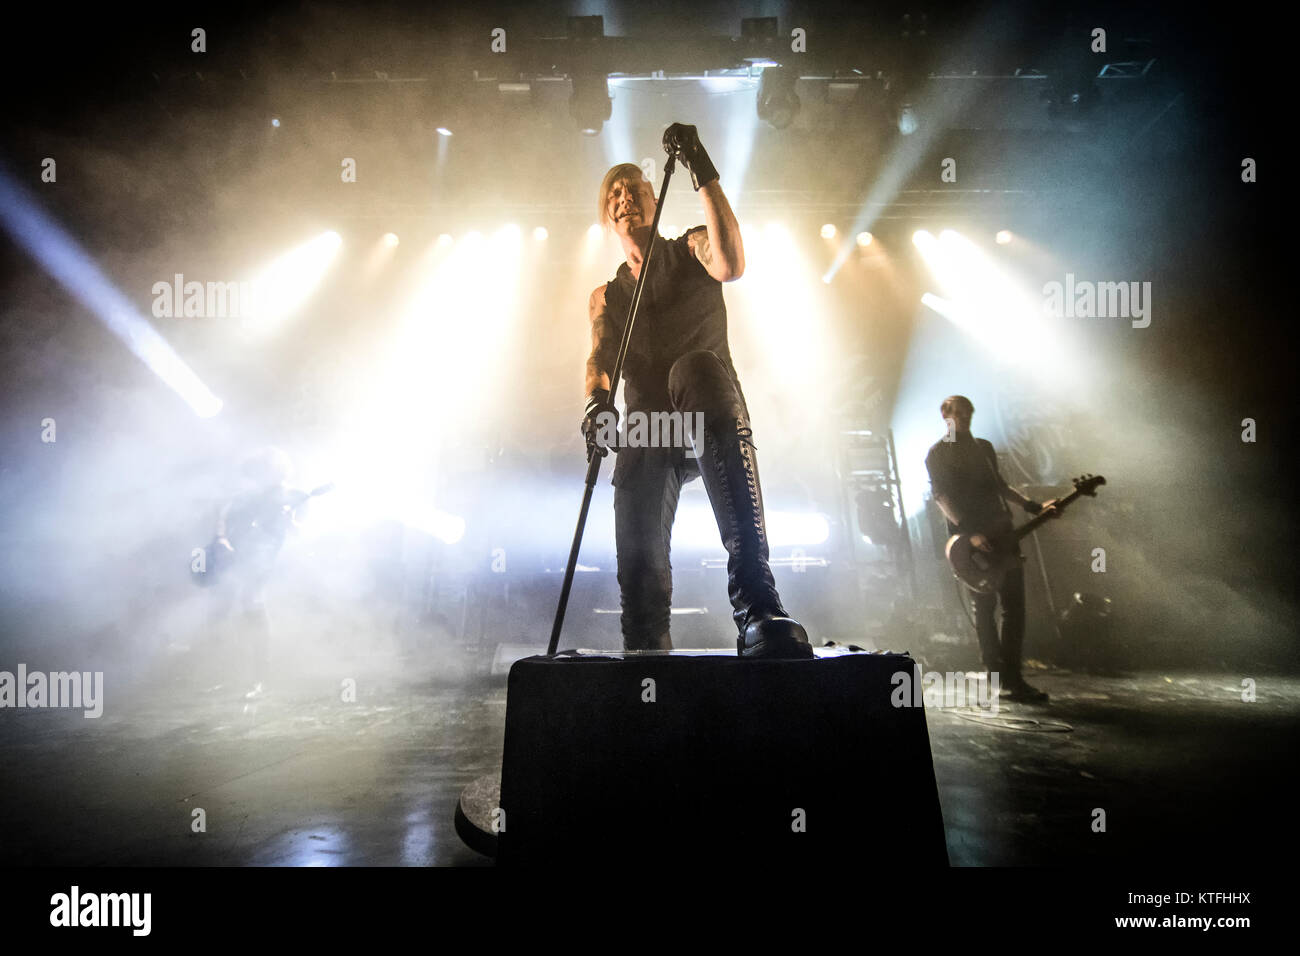 The alternative Norwegian rock band Seigmen (previously known as Klisne Seigmenn) performs a live concert at Sentrum Scene. Here vocalist, musician and songwriter Alex Møklebust is seen live on stage. Norway, 30/09 2016. Stock Photo